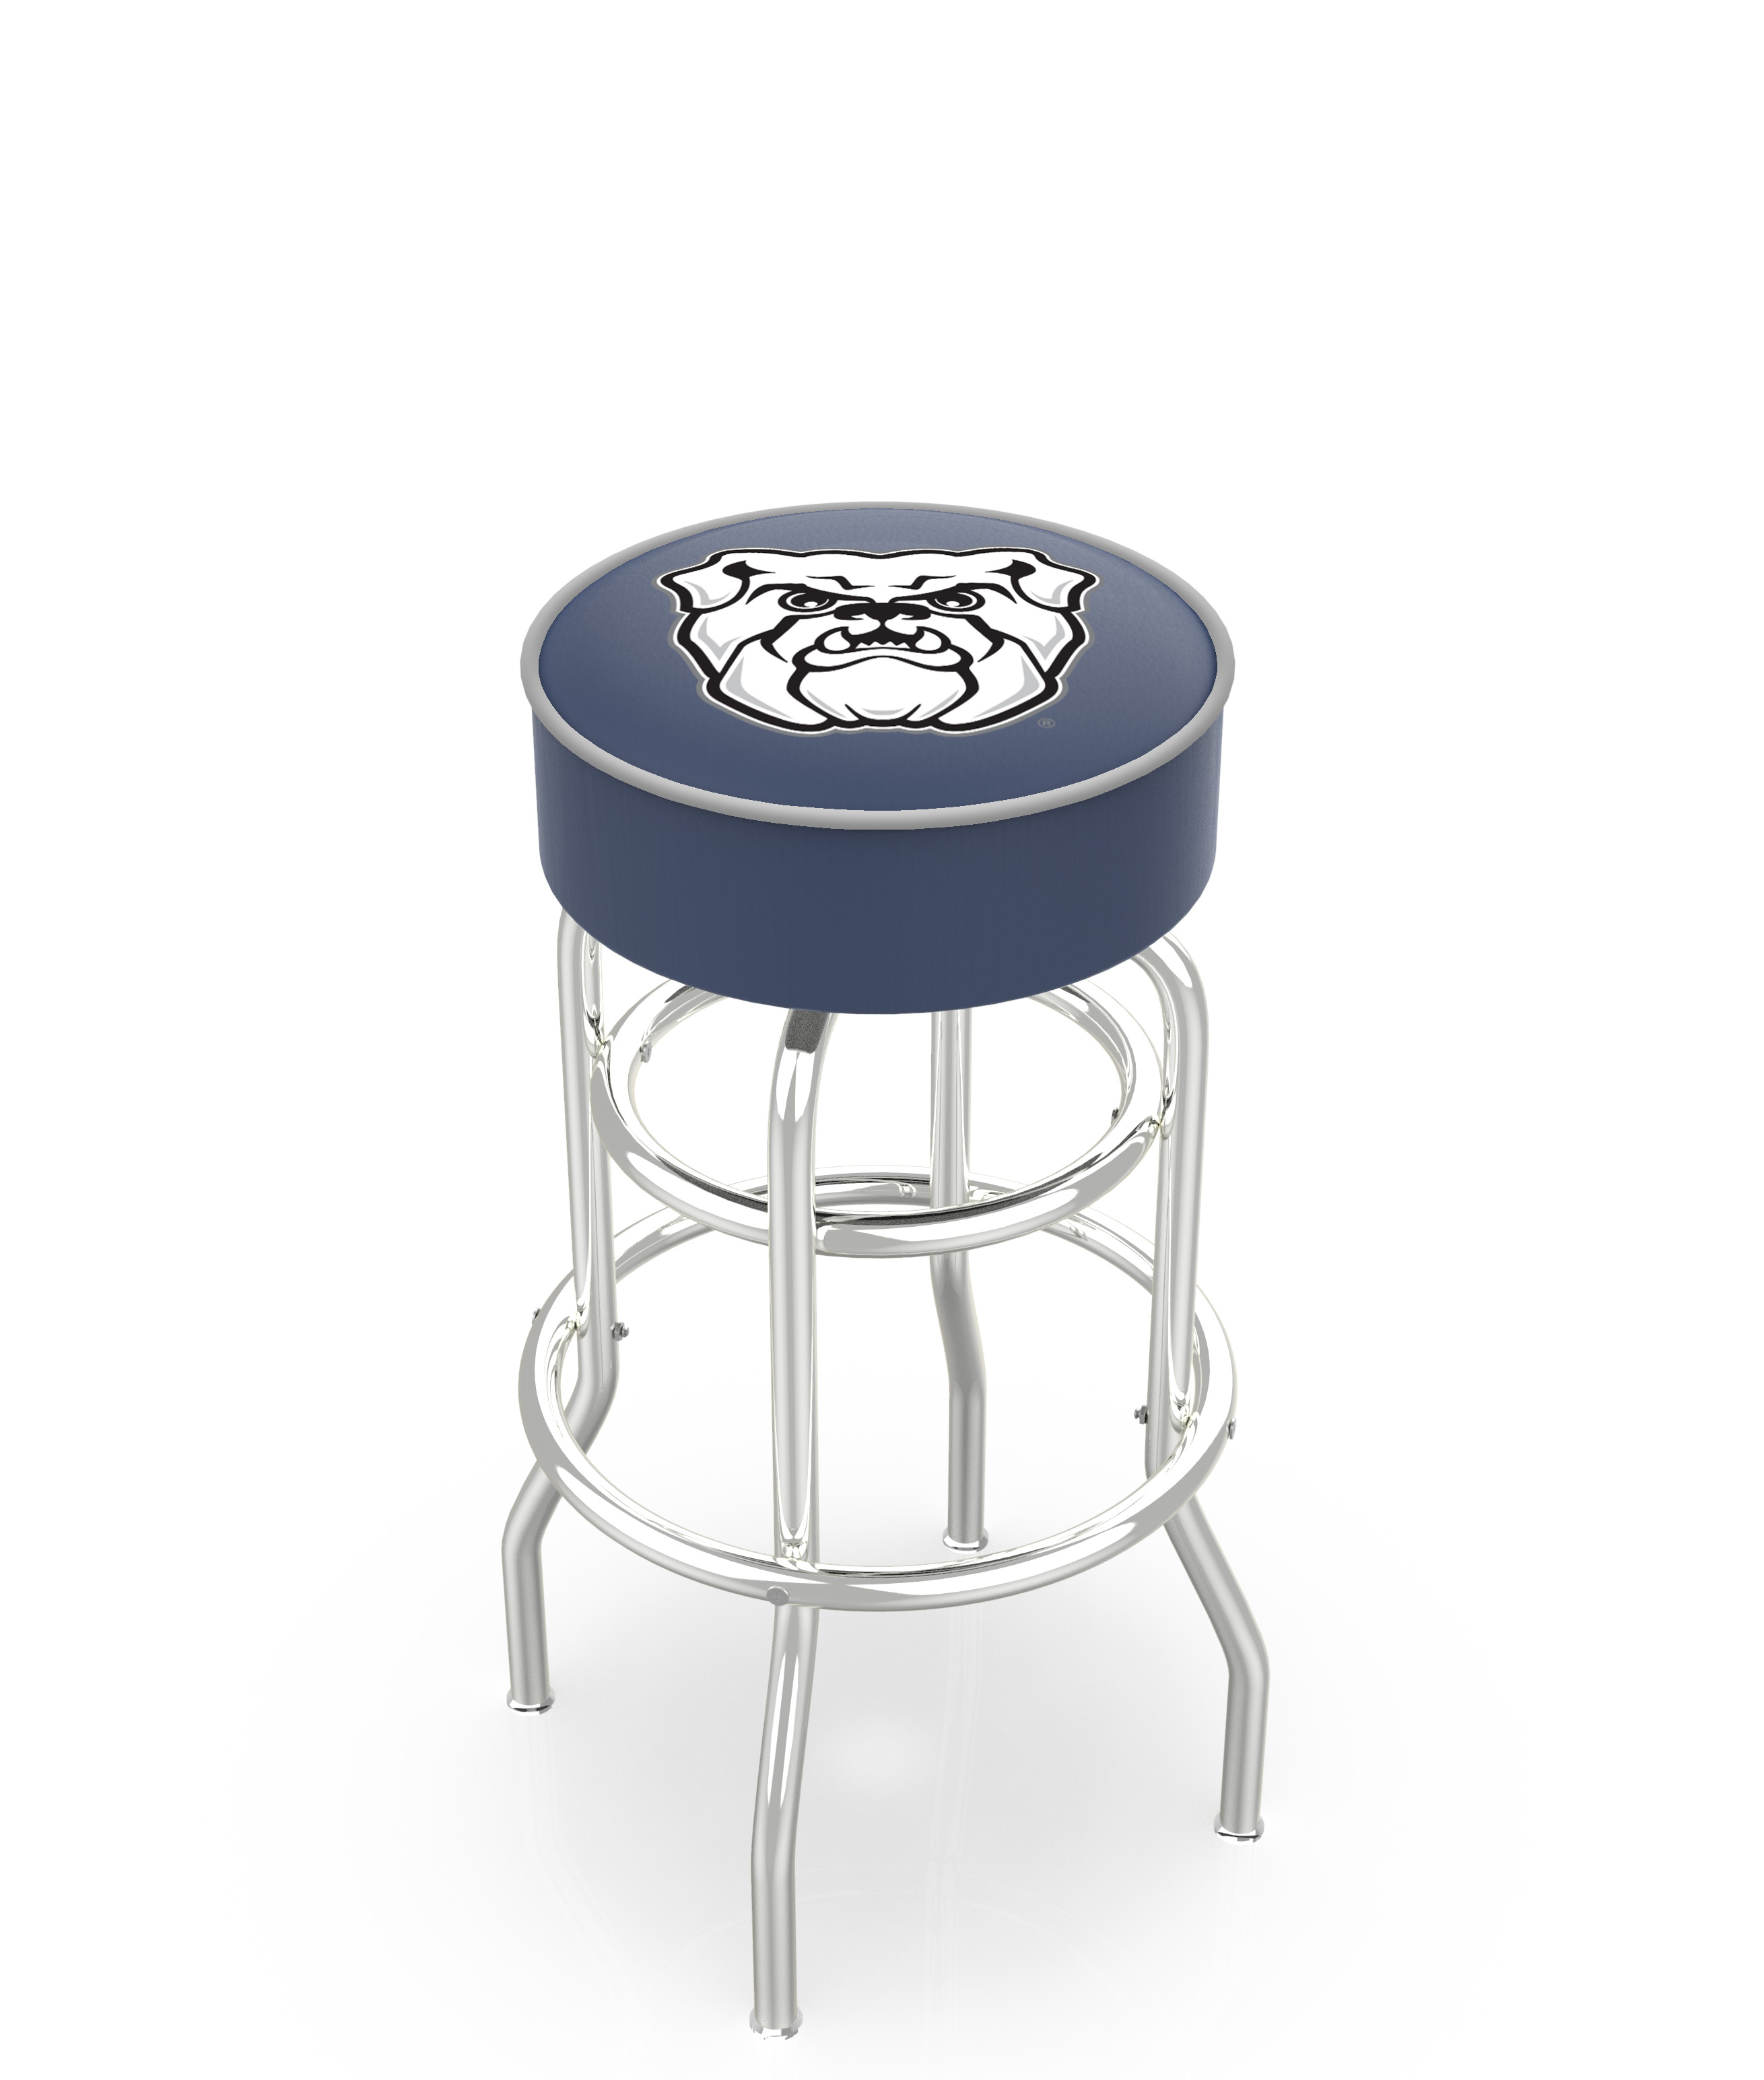 Picture of Holland Bar Stool L7C130Butler 30 in. L7C1 - 4 in. Butler Cushion Seat with Double-Ring Chrome Base Swivel Bar Stool